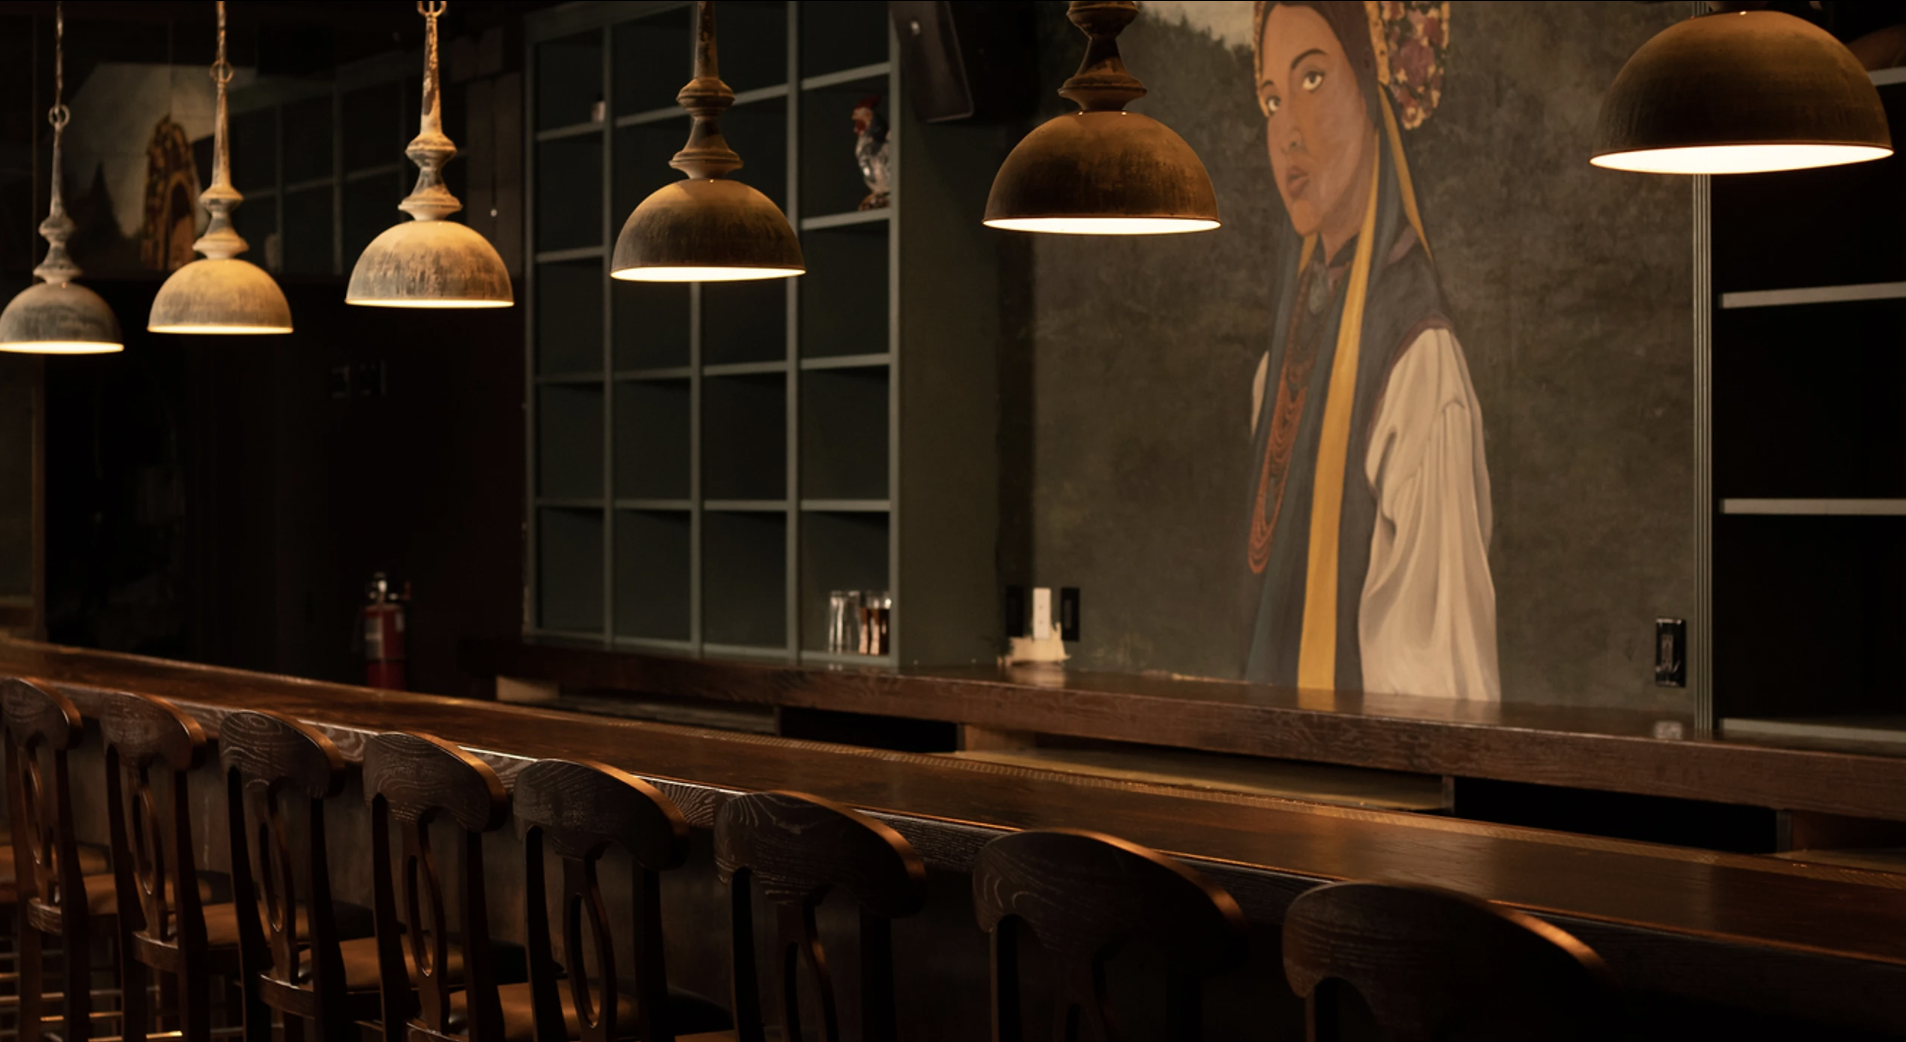 A dark bar with a mural of a woman and hanging lamps.